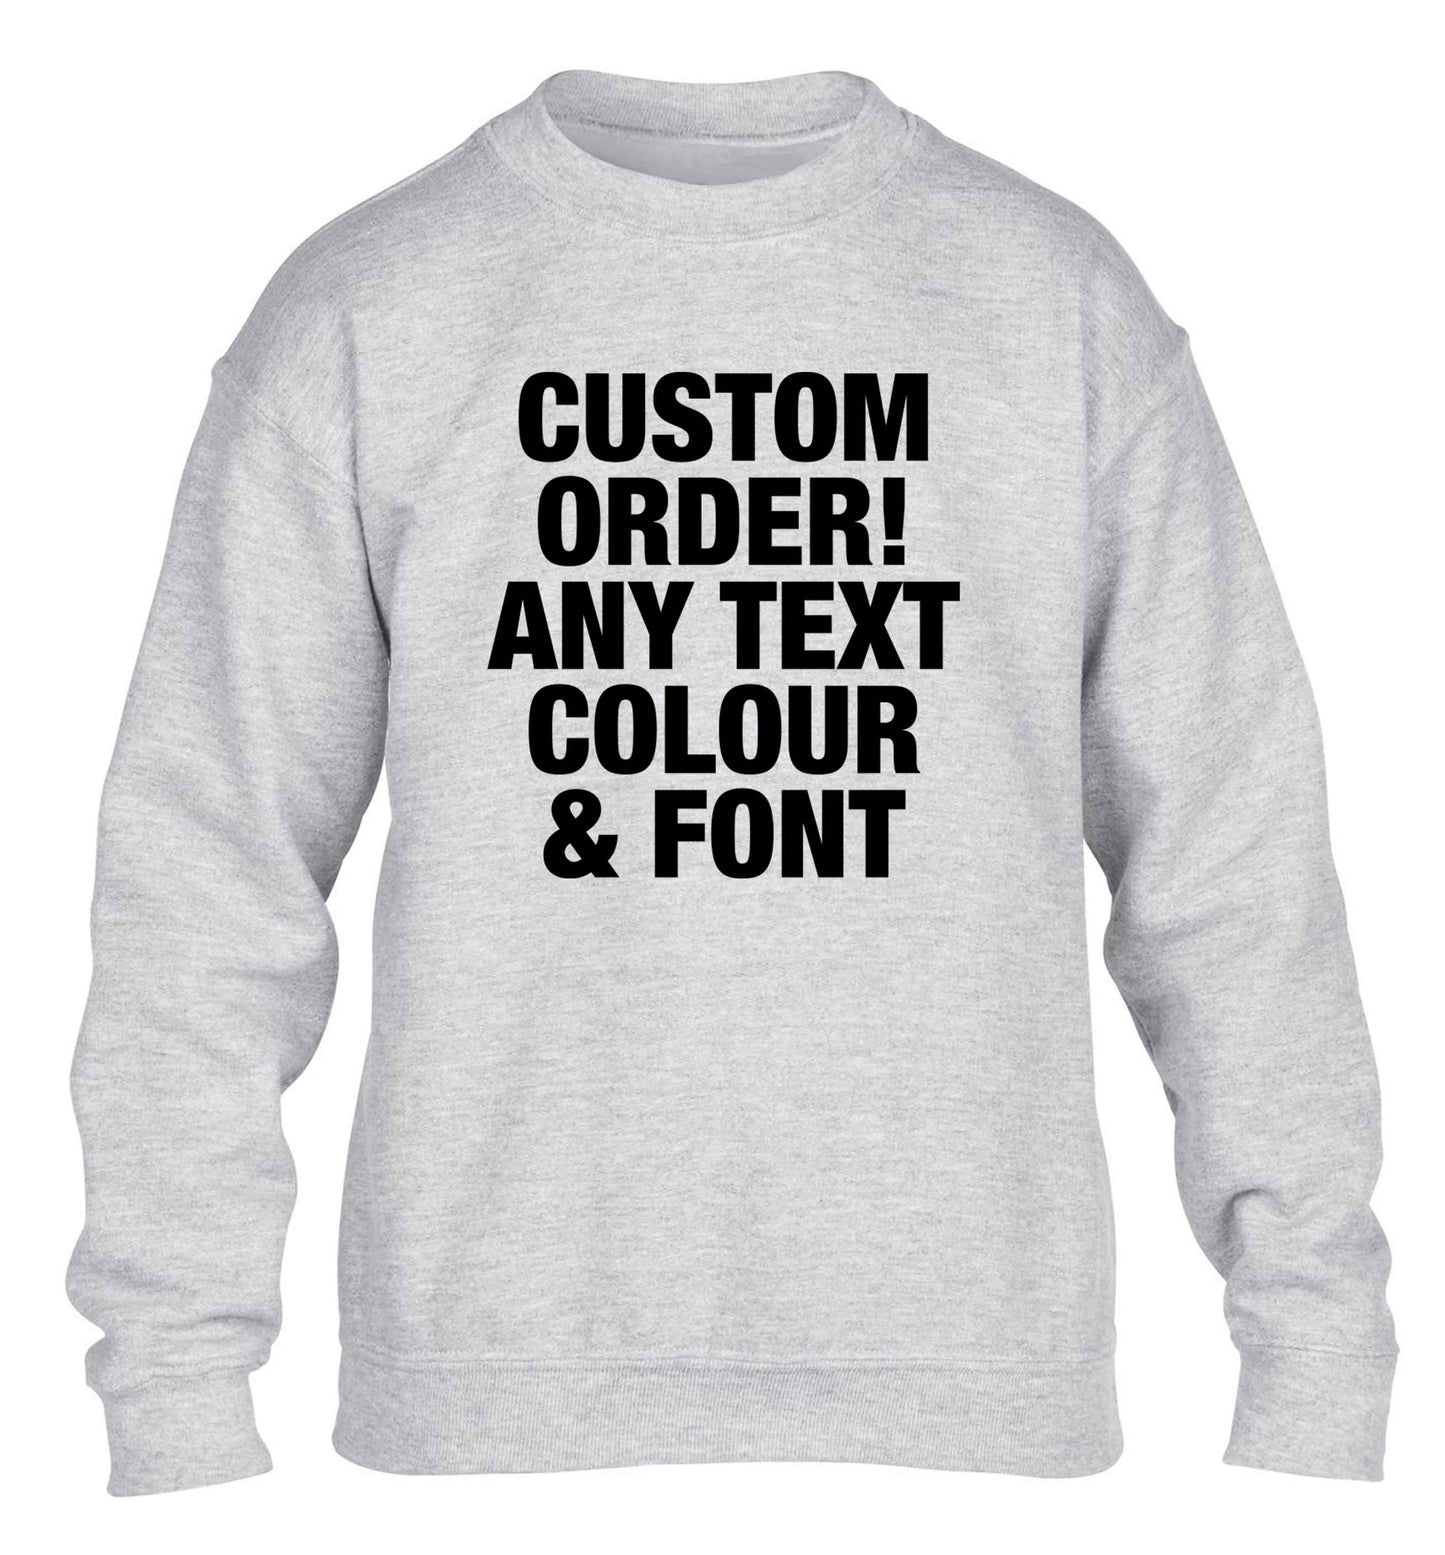 Custom order any text colour and font children's grey sweater 12-13 Years